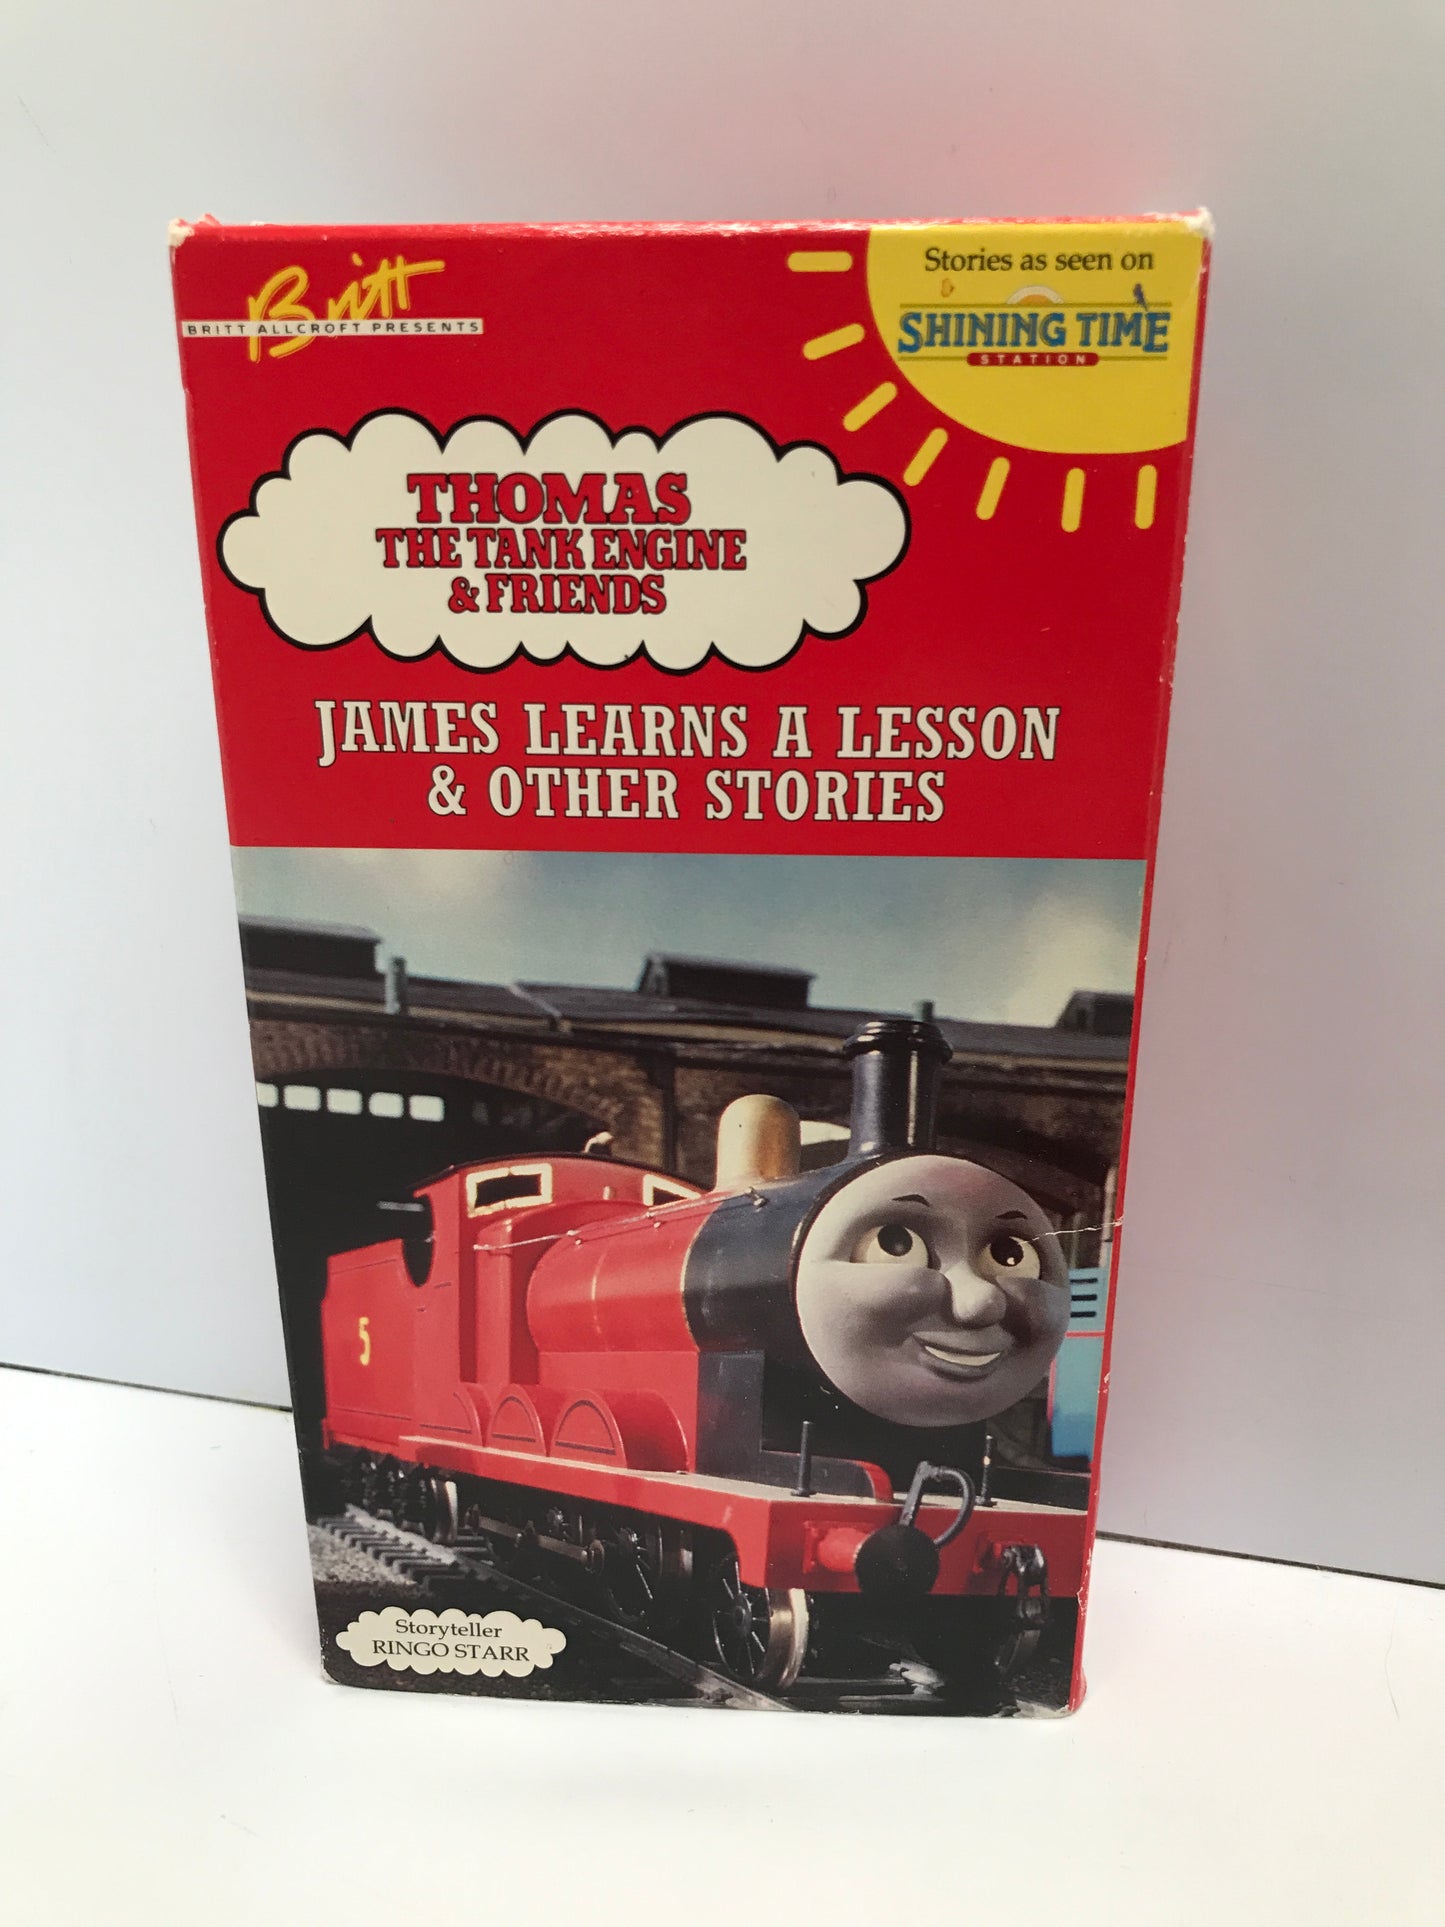 1980's Vintage Thomas The Tank Engine With Ringo Starr Original VHS Movie And Bored Book With Train Stamp